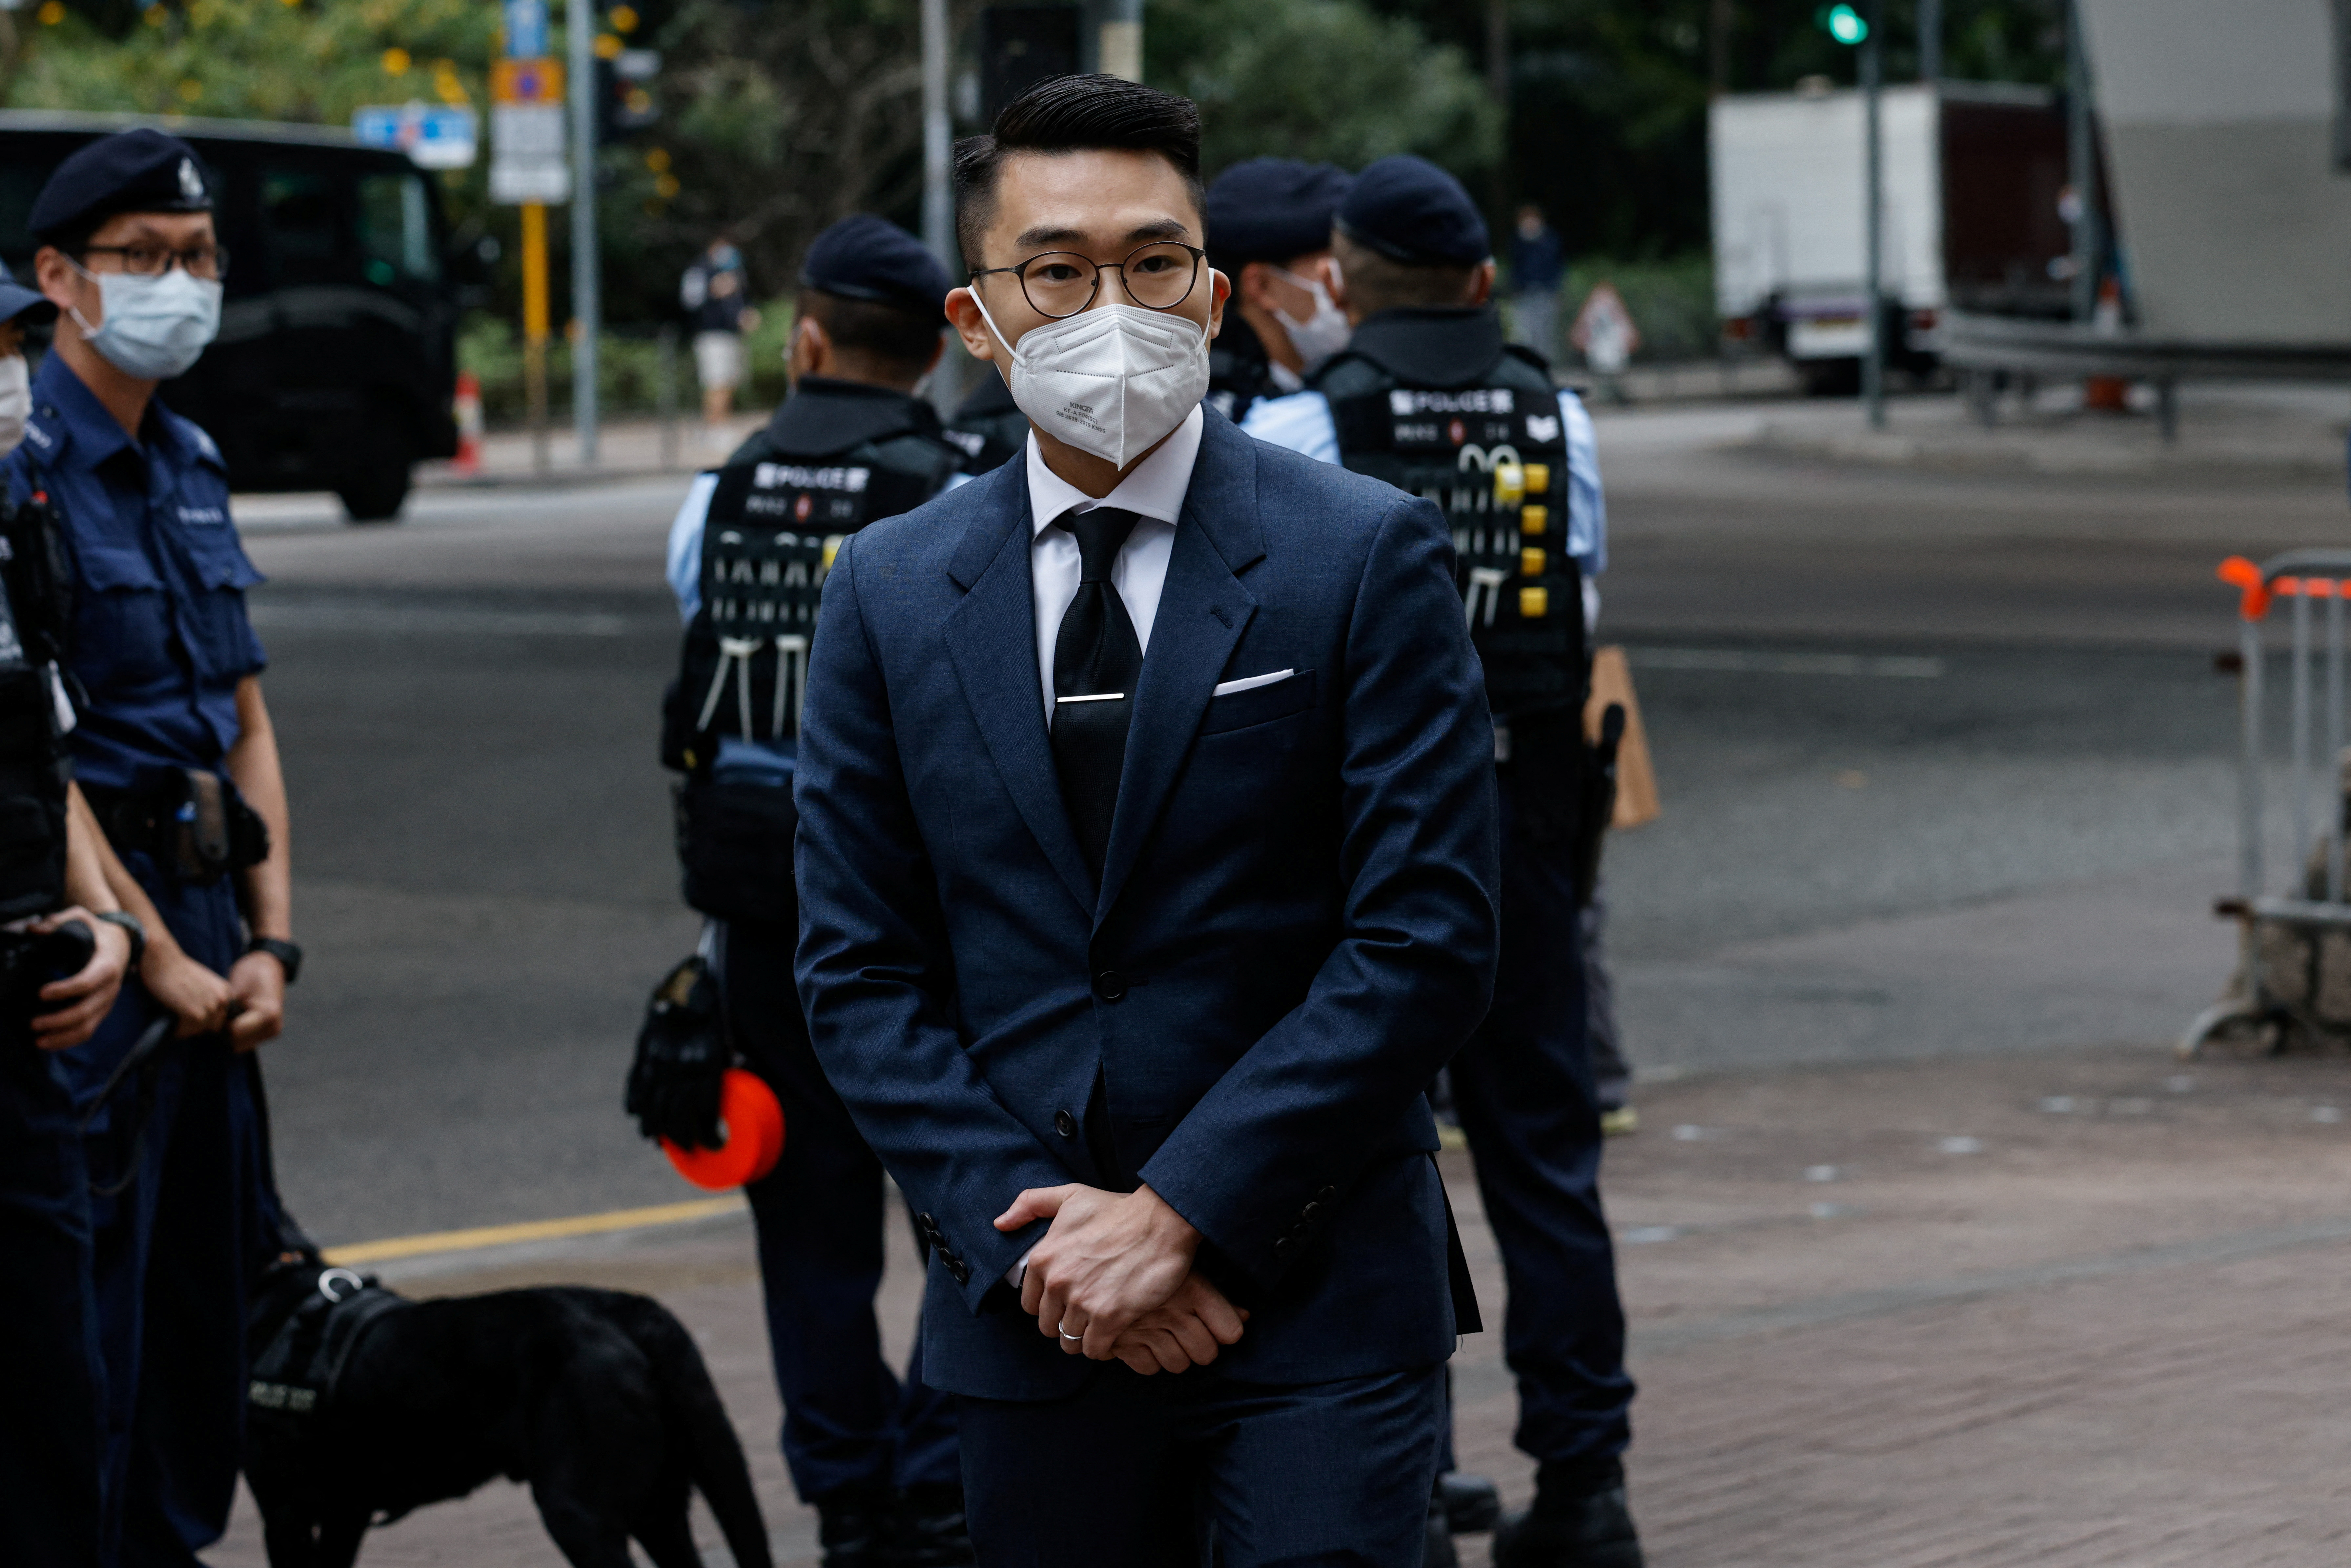 Michael Pang Cheuk-kei, one of the 47 pro-democracy activists charged with conspiracy to commit subversion under the national security law, arrives at the West Kowloon Magistrates' Courts building in Hong Kong